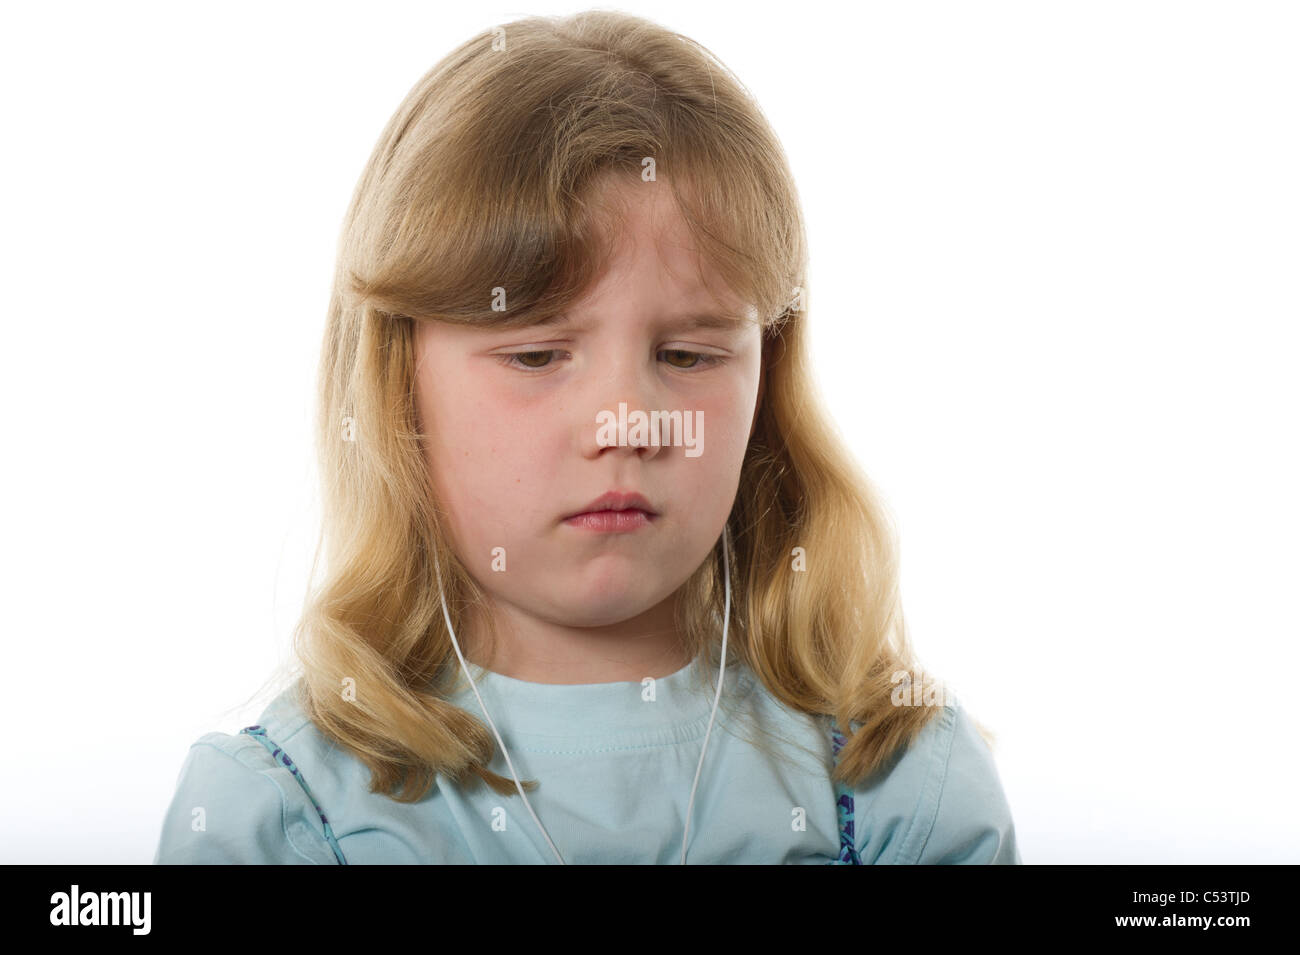 Young girl of primary age looking upset or unhappy against plain white studio background. Stock Photo